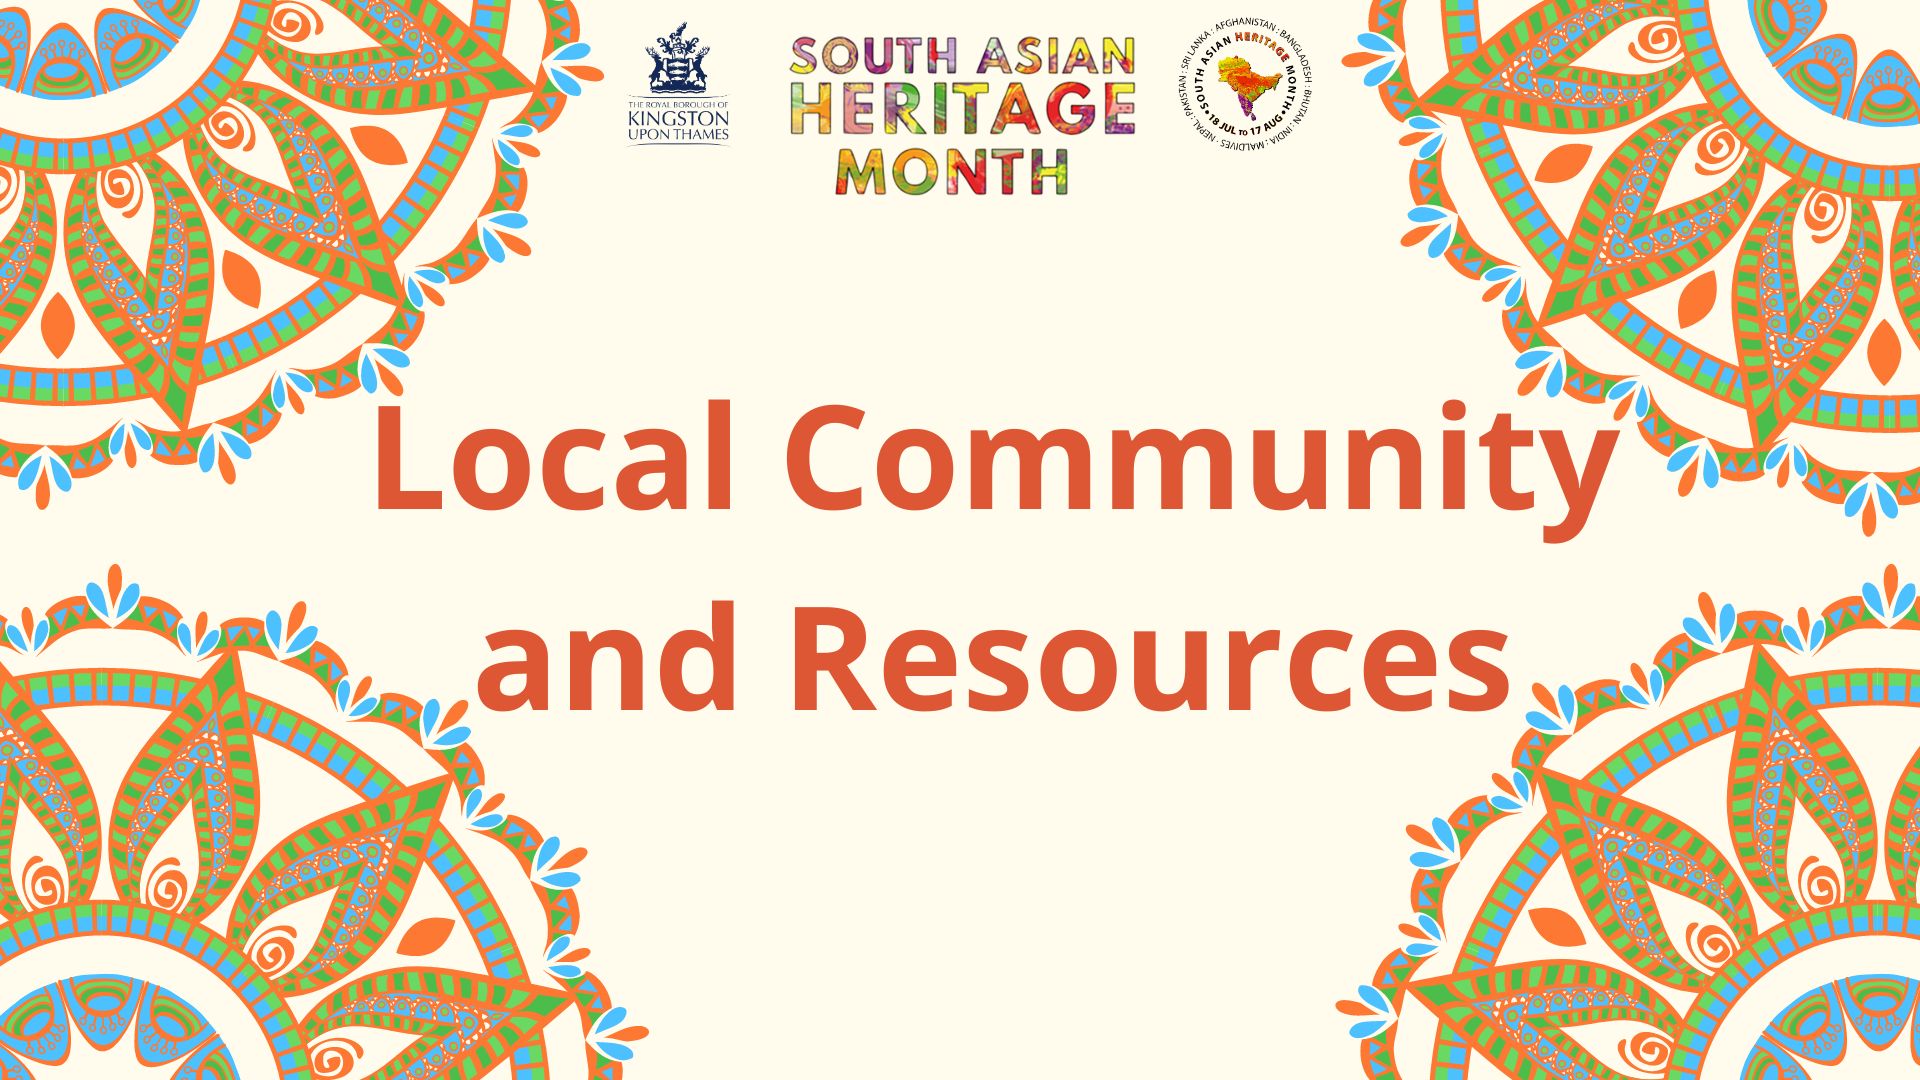 Local community and resources